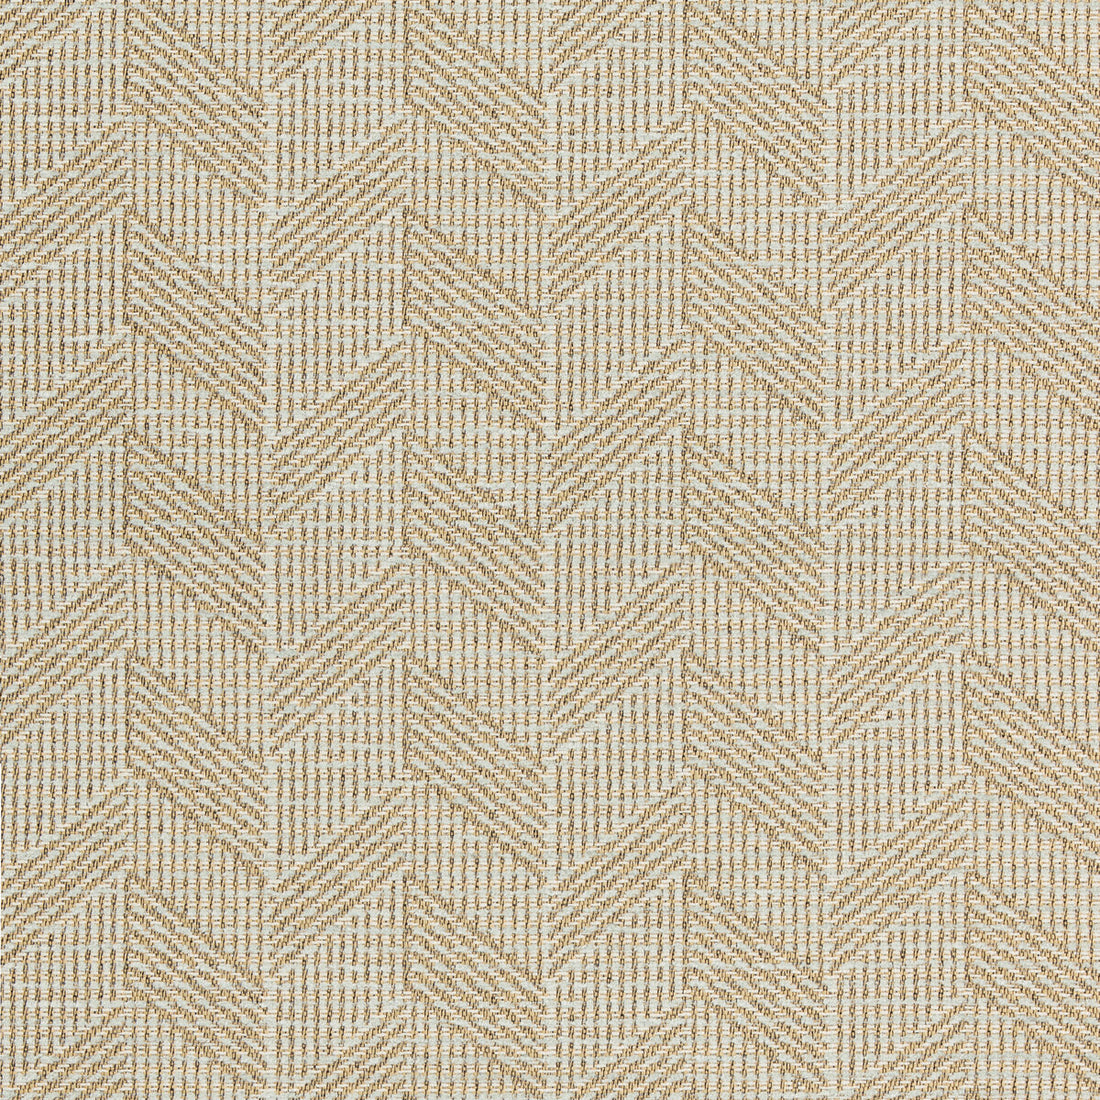 Cayuga fabric in sandalwood color - pattern 35862.1611.0 - by Kravet Contract in the Gis Crypton collection